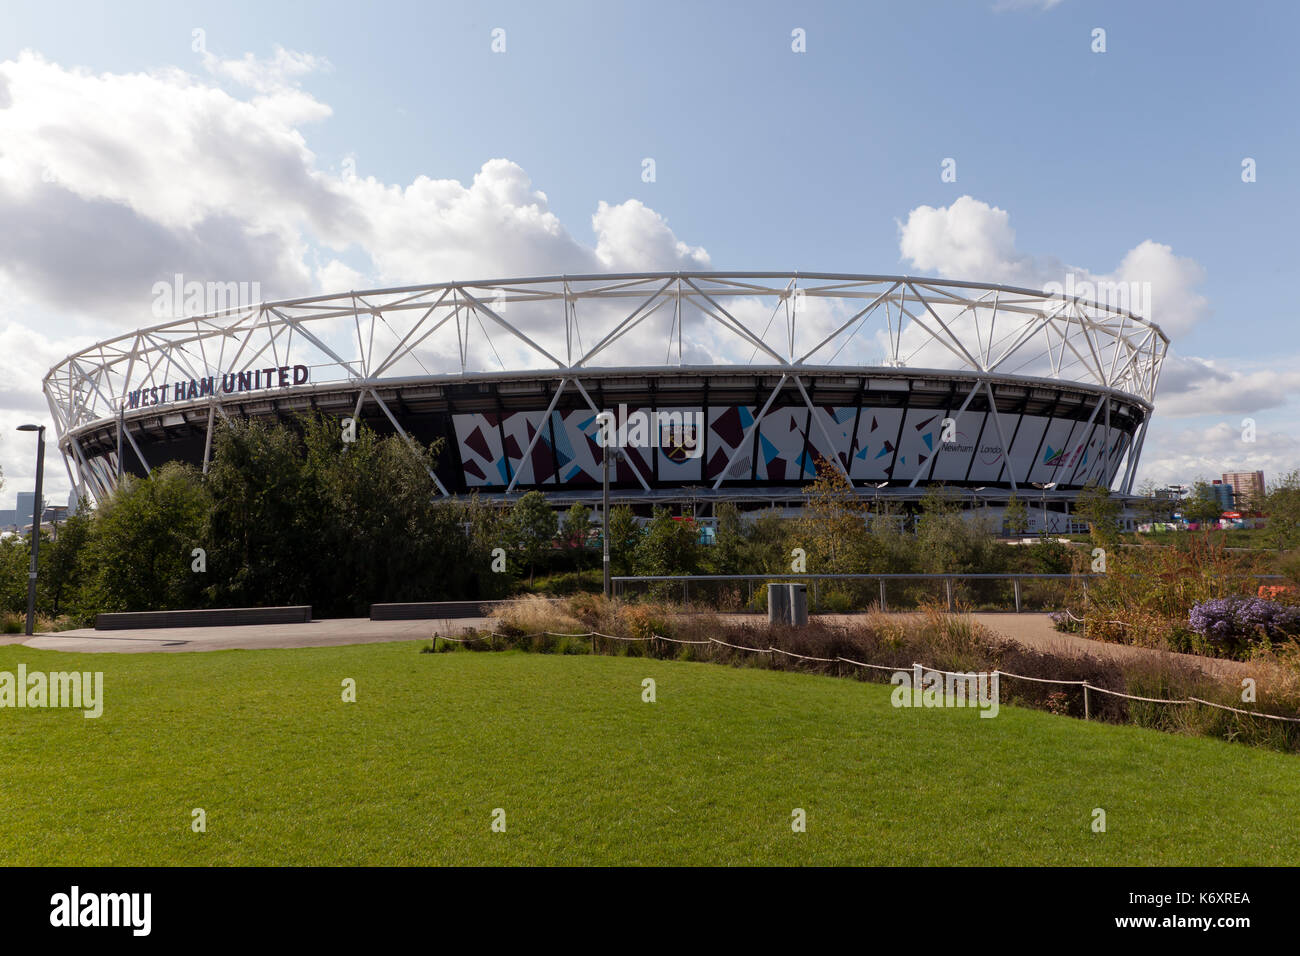 View of the West Ham United Football Club Stadium, Queen Elizabeth Olympic Park, Stratford Stock Photo